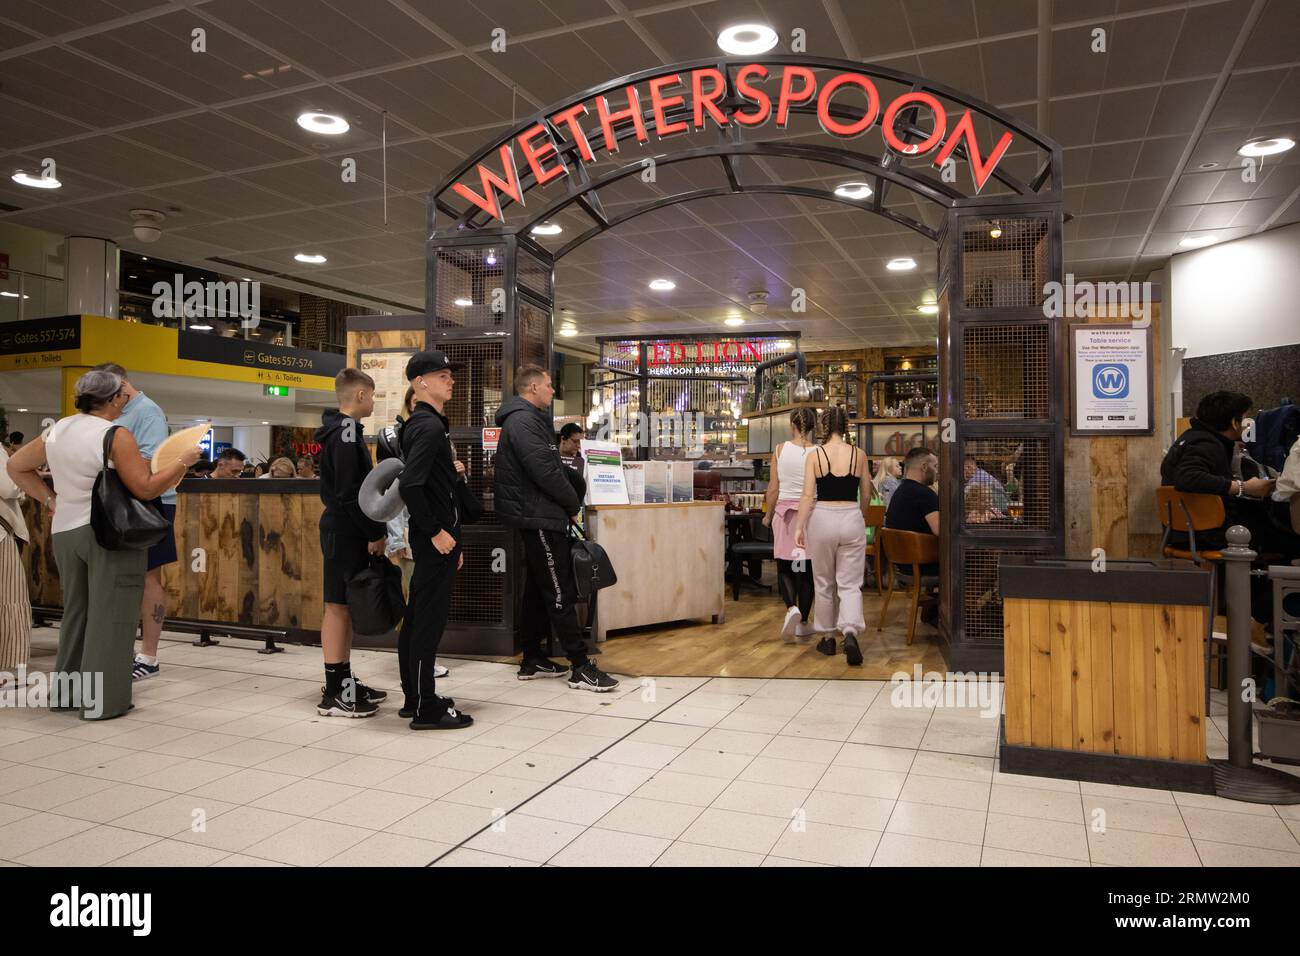 Wetherspoon pub restaurant in the departure lounge at Gatwick North airport terminal, England, UK Stock Photo